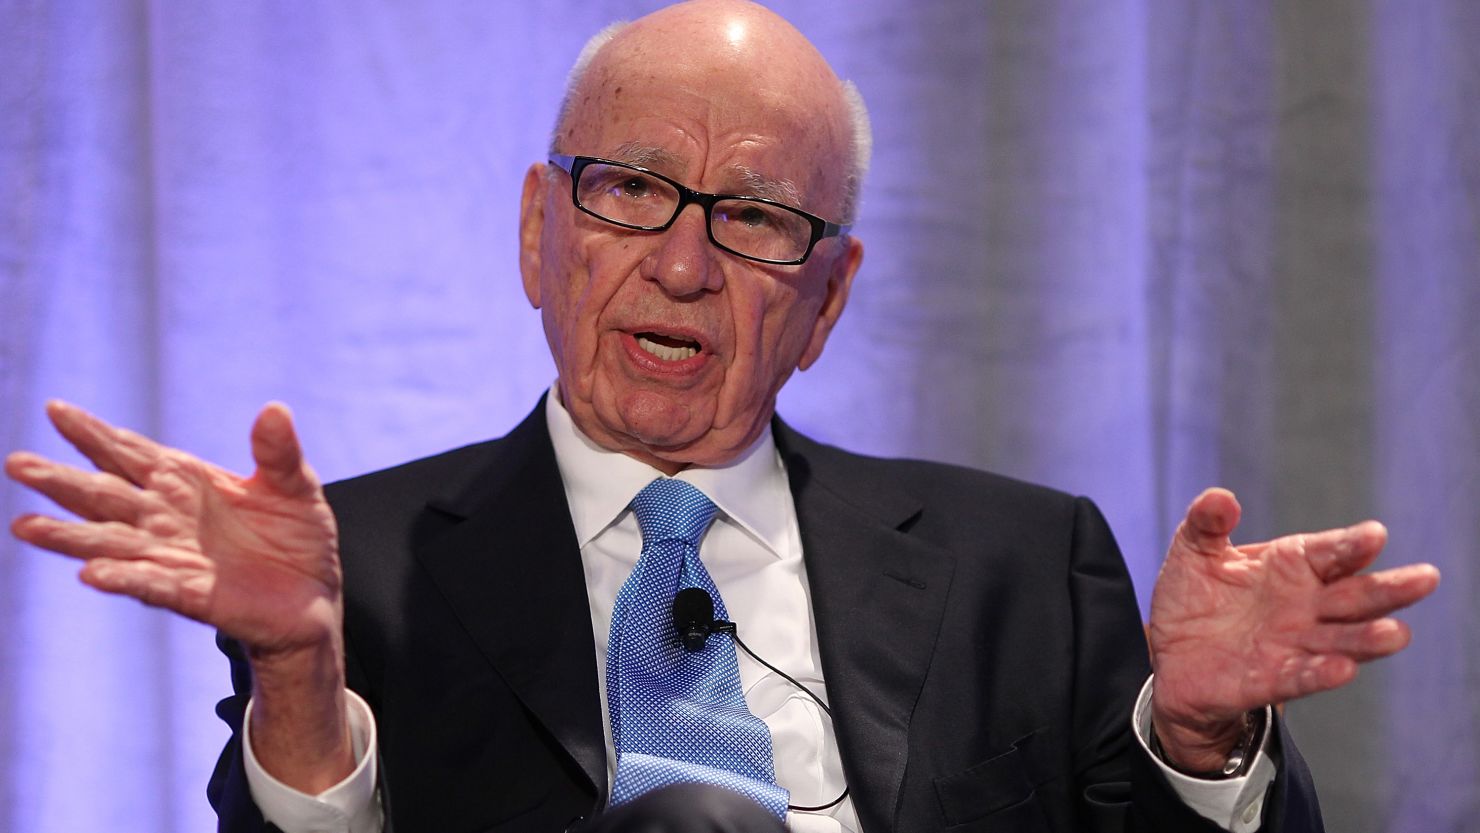 The newspaper business is in Rupert Murdoch's blood, he was the only son of a celebrated journalist.